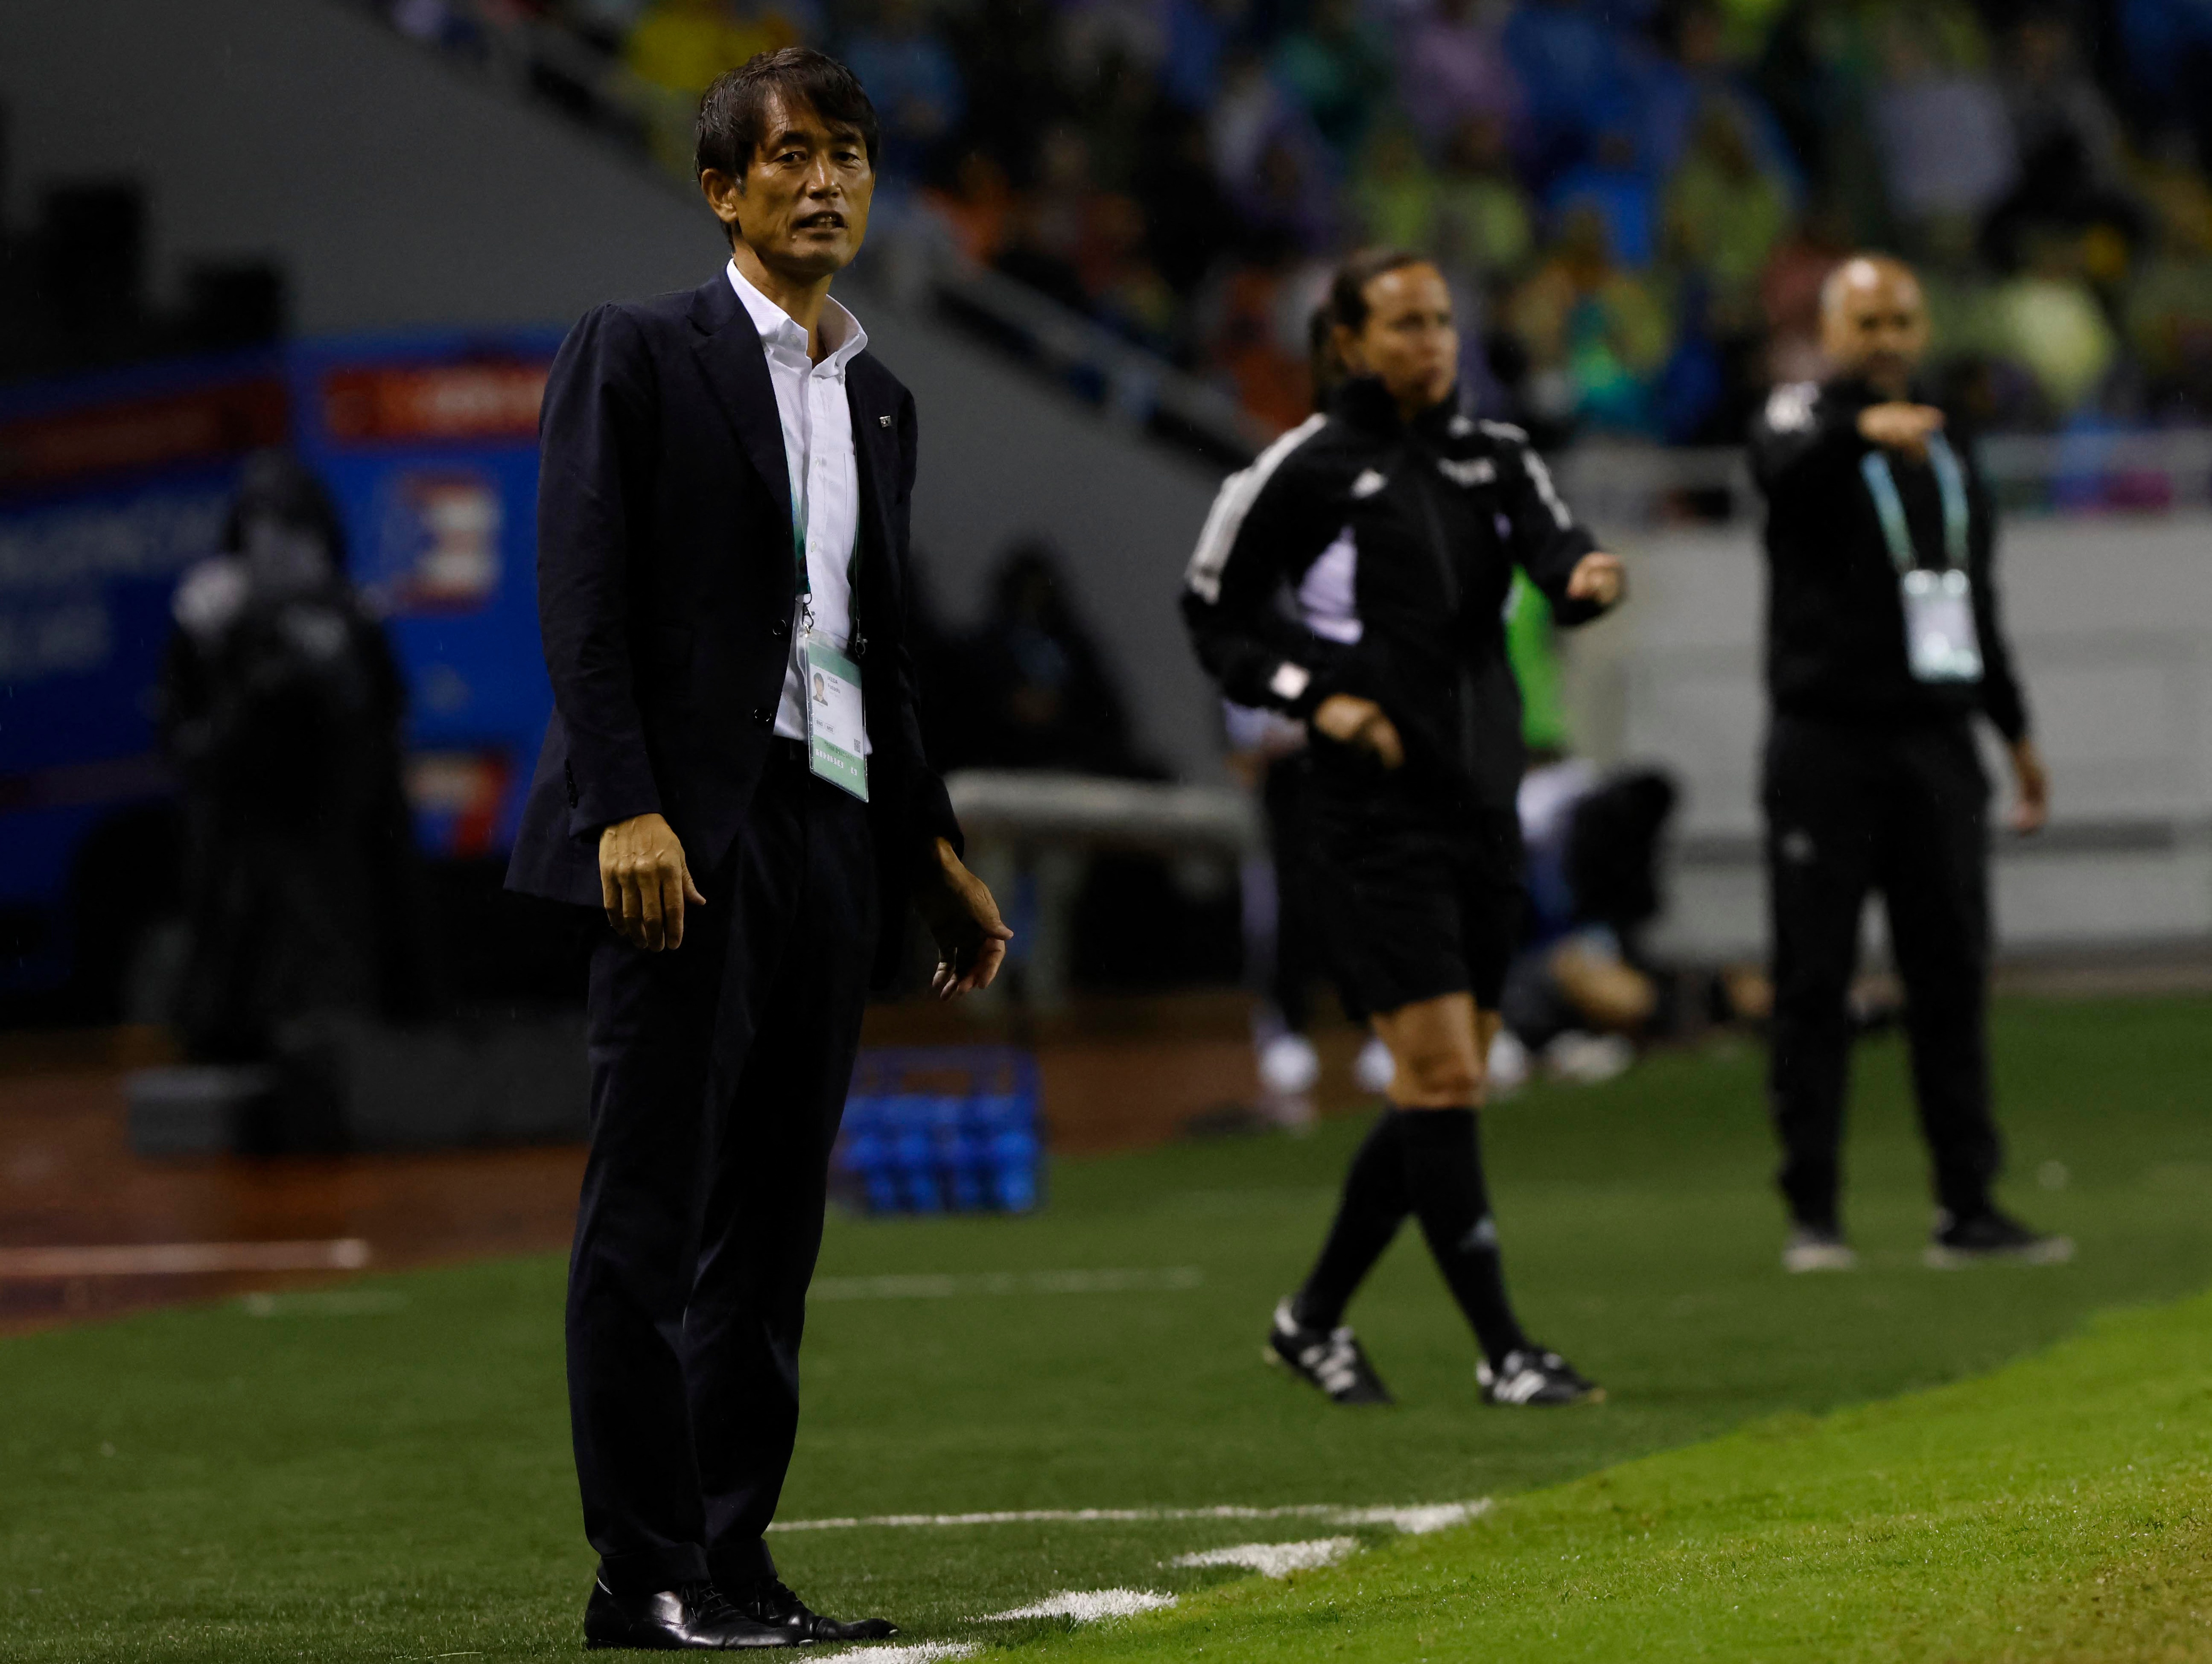 Womens World Cup TV blackout will harm game, says Japan coach Reuters